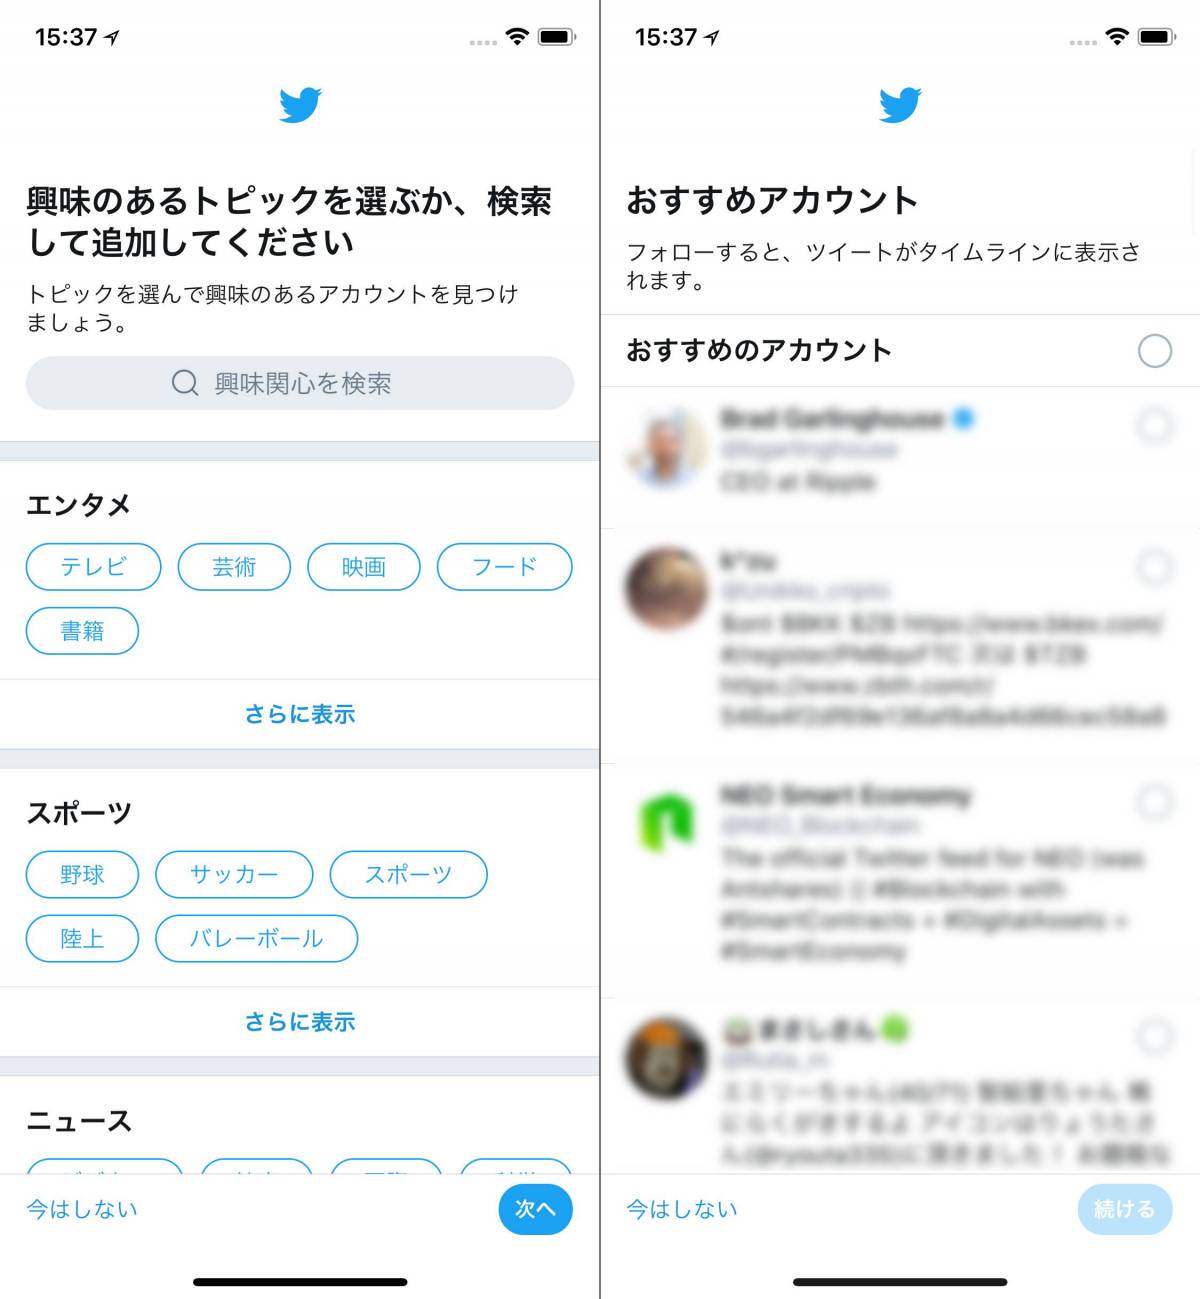 Twitter 新規アカウント作成方法 初心者ガイド Iphone Android Pc Appliv Topics